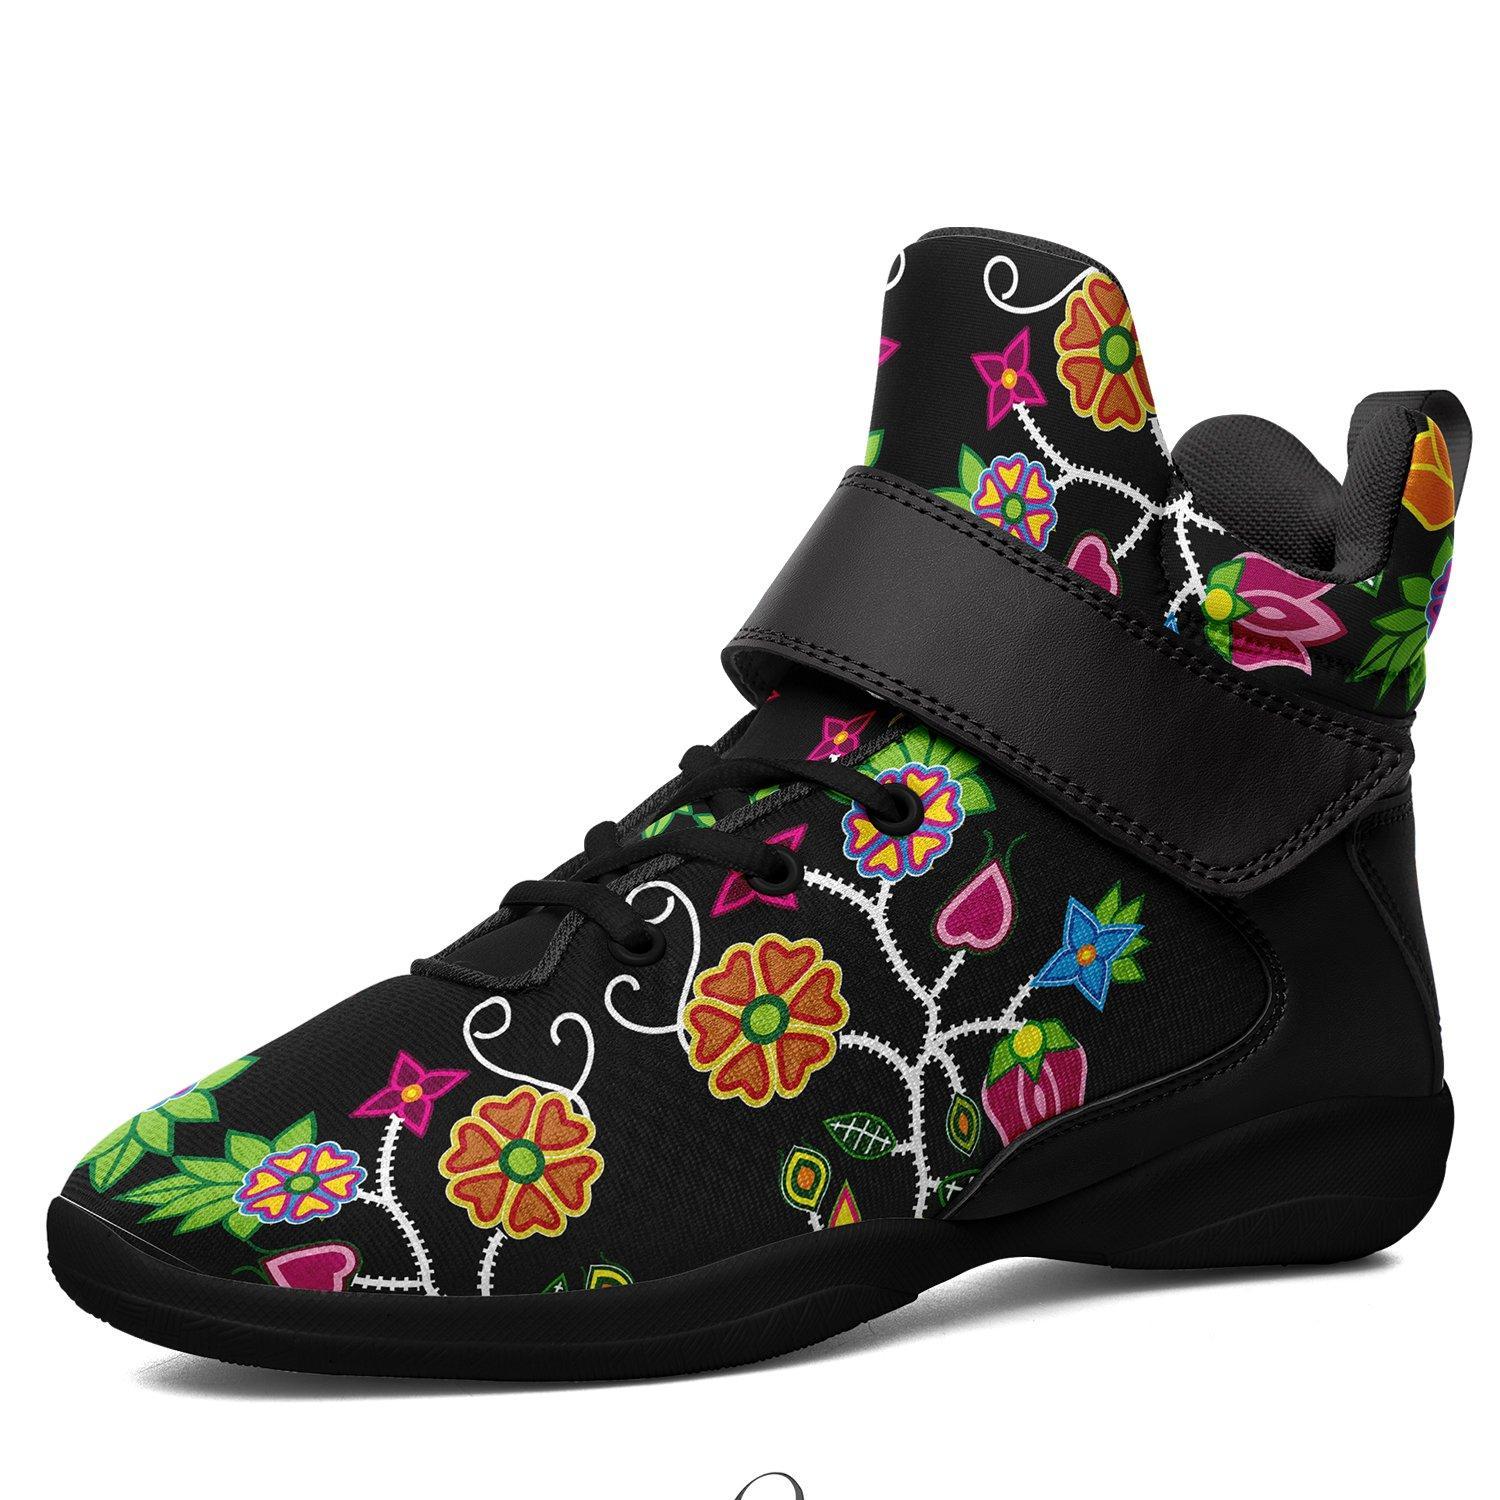 Floral Beadwork Ipottaa Basketball / Sport High Top Shoes - Black Sole 49 Dzine US Men 7 / EUR 40 Black Sole with Black Strap 